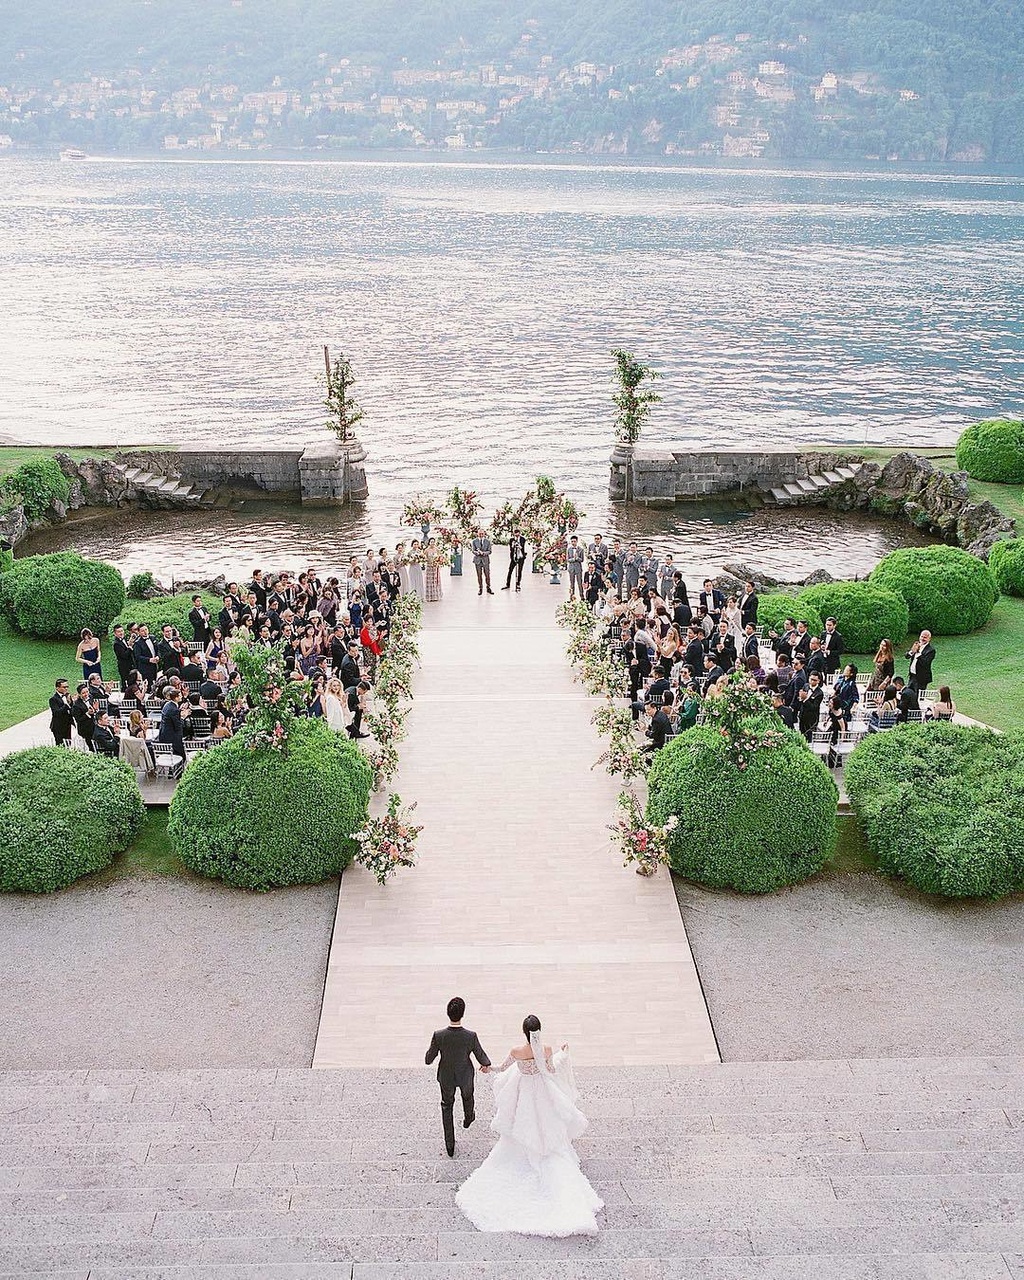 Lake Como wedding ceremony by the water